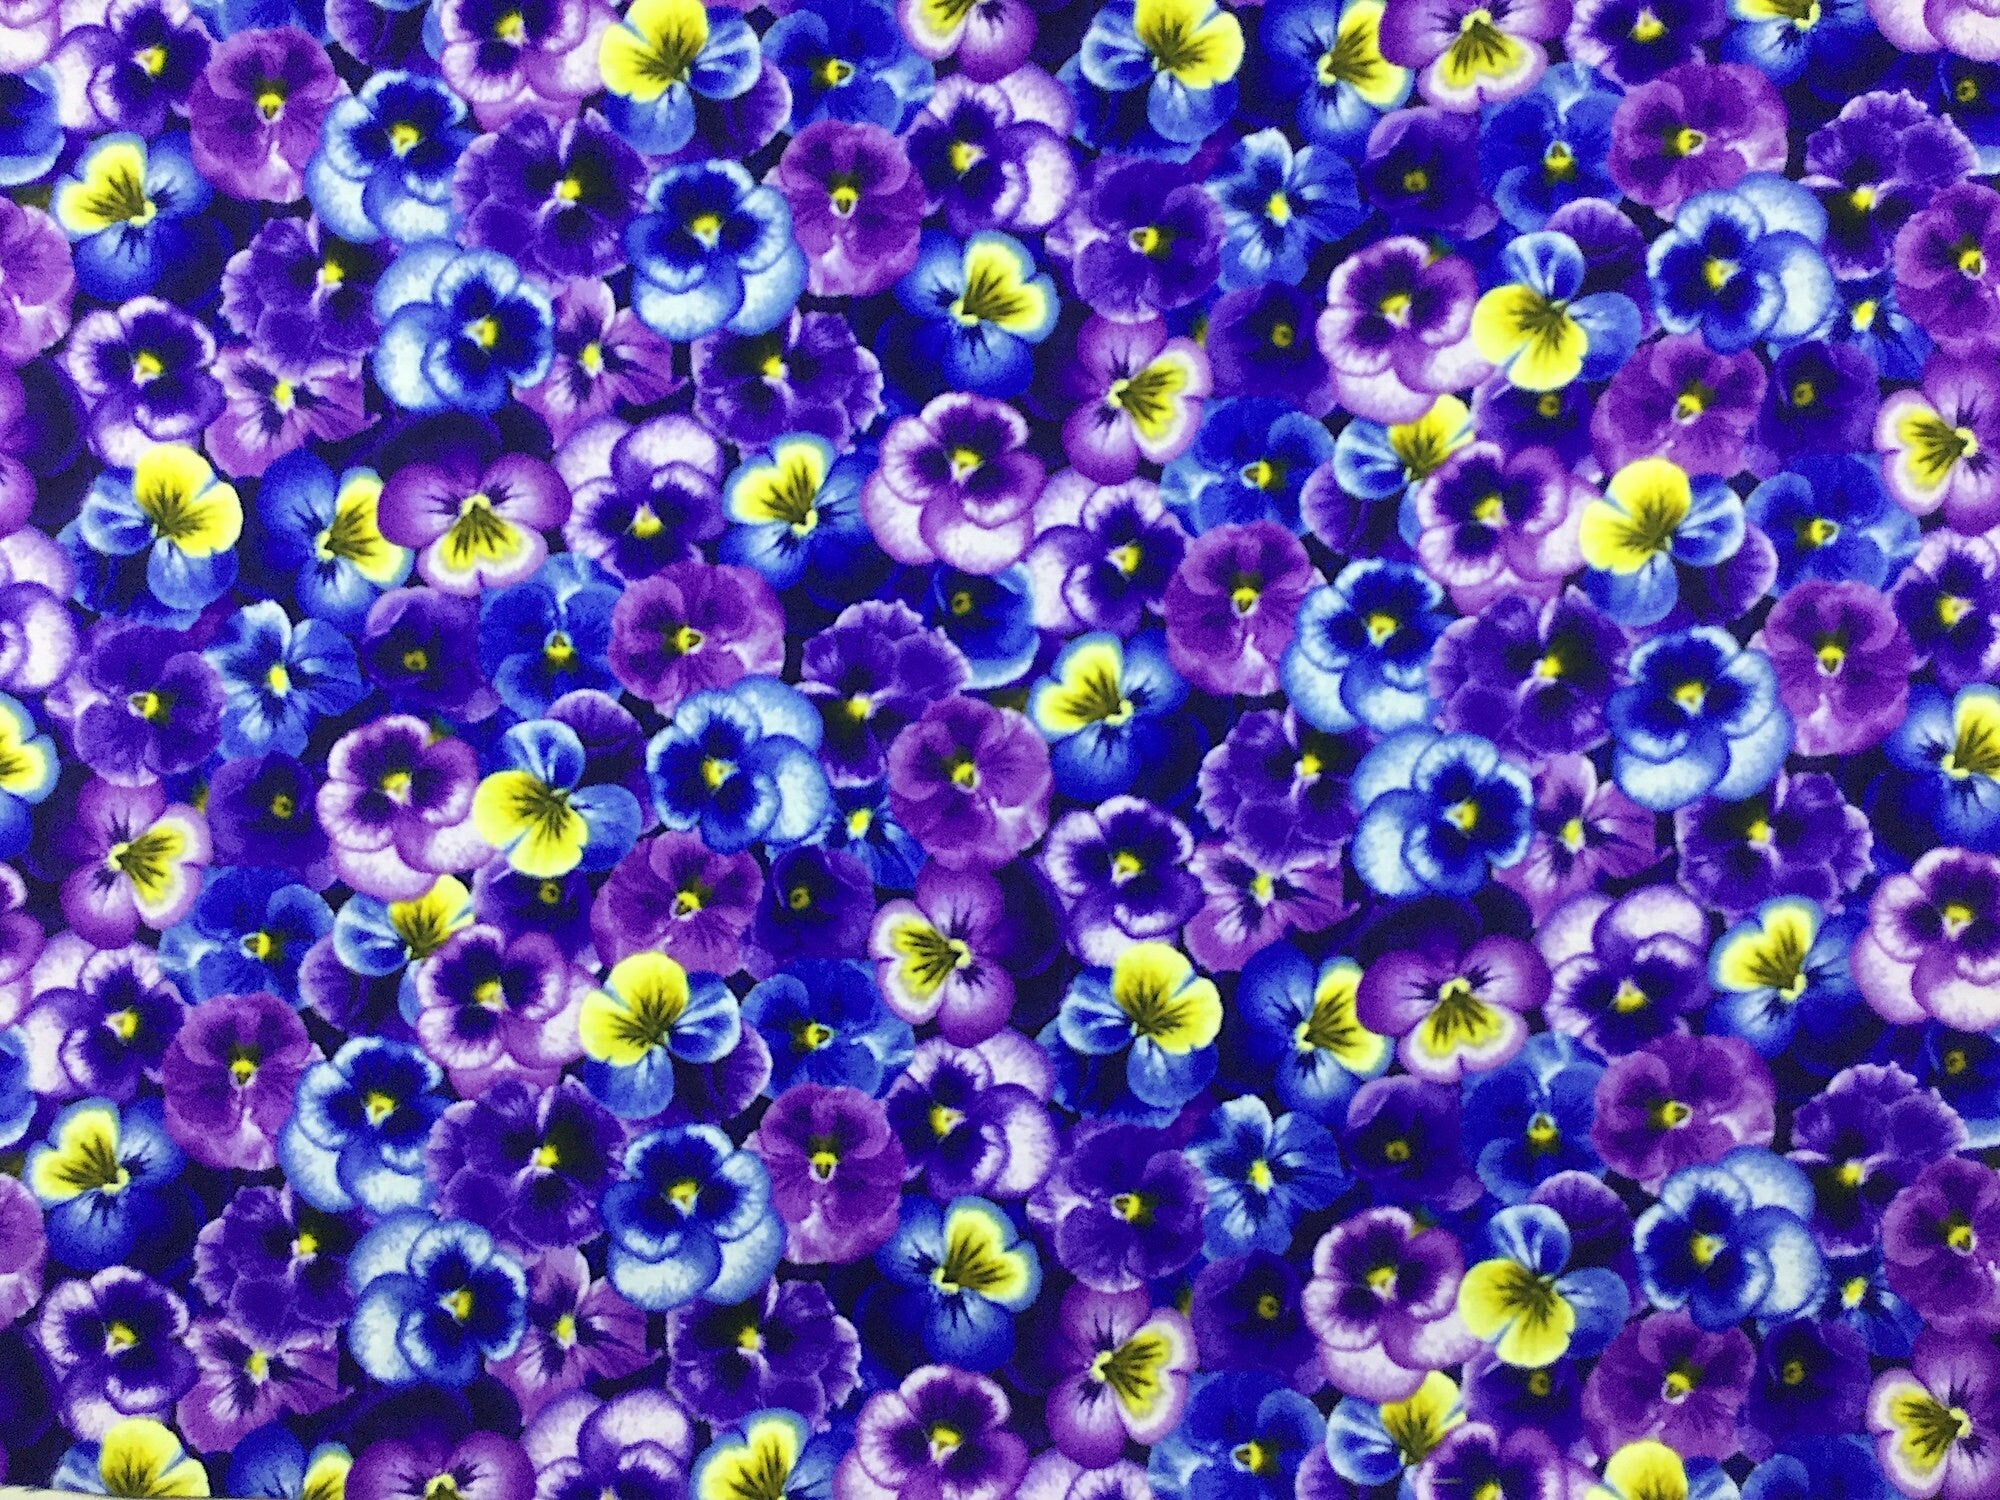 This fabric is covered with purple and blue pansies. The pansies are packed closely together to make them a bed of pansies.